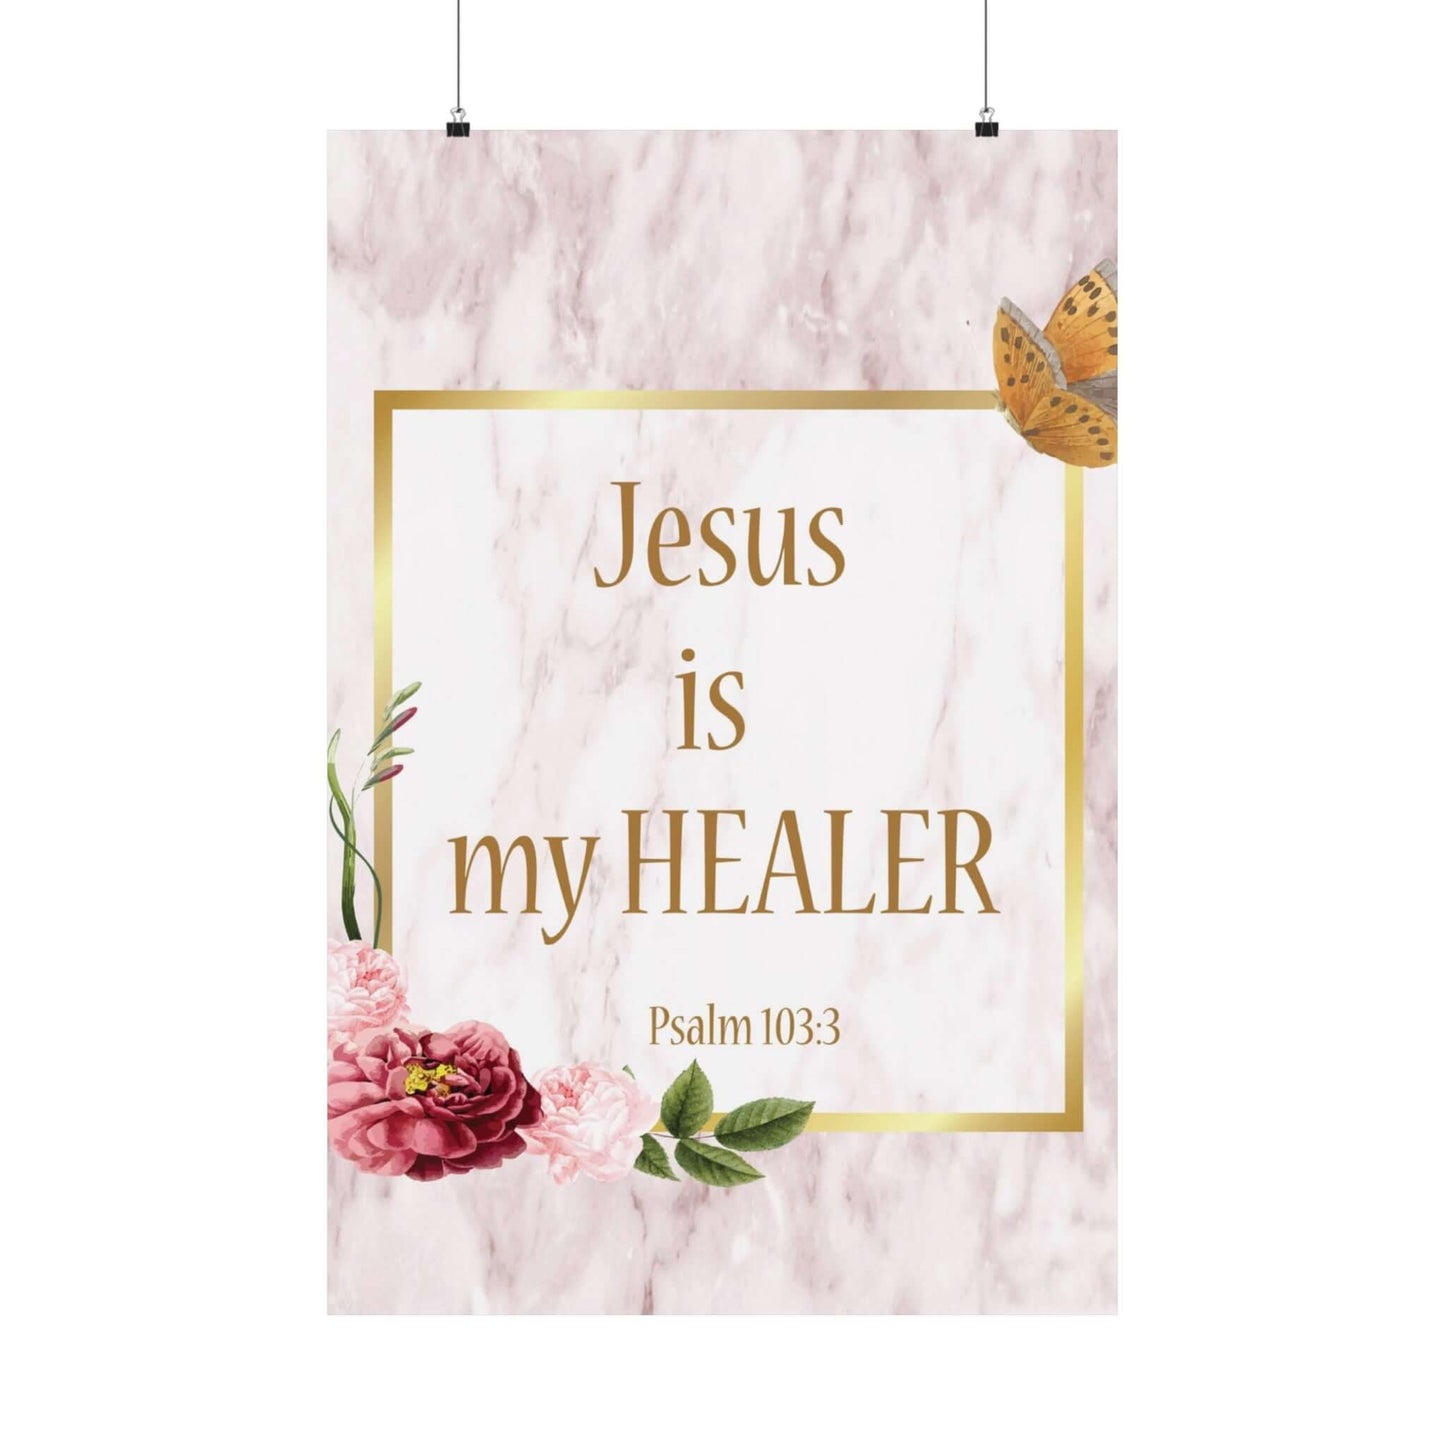 Colorful Wall Decor Poster - Premium Matte Vertical with Psalm 103:3 | Assembled in the USA,Assembled in USA,Back to School,Home & Living,Indoor,Made in the USA,Made in USA,Matte,Paper,Posters,Valentine's Day promotion